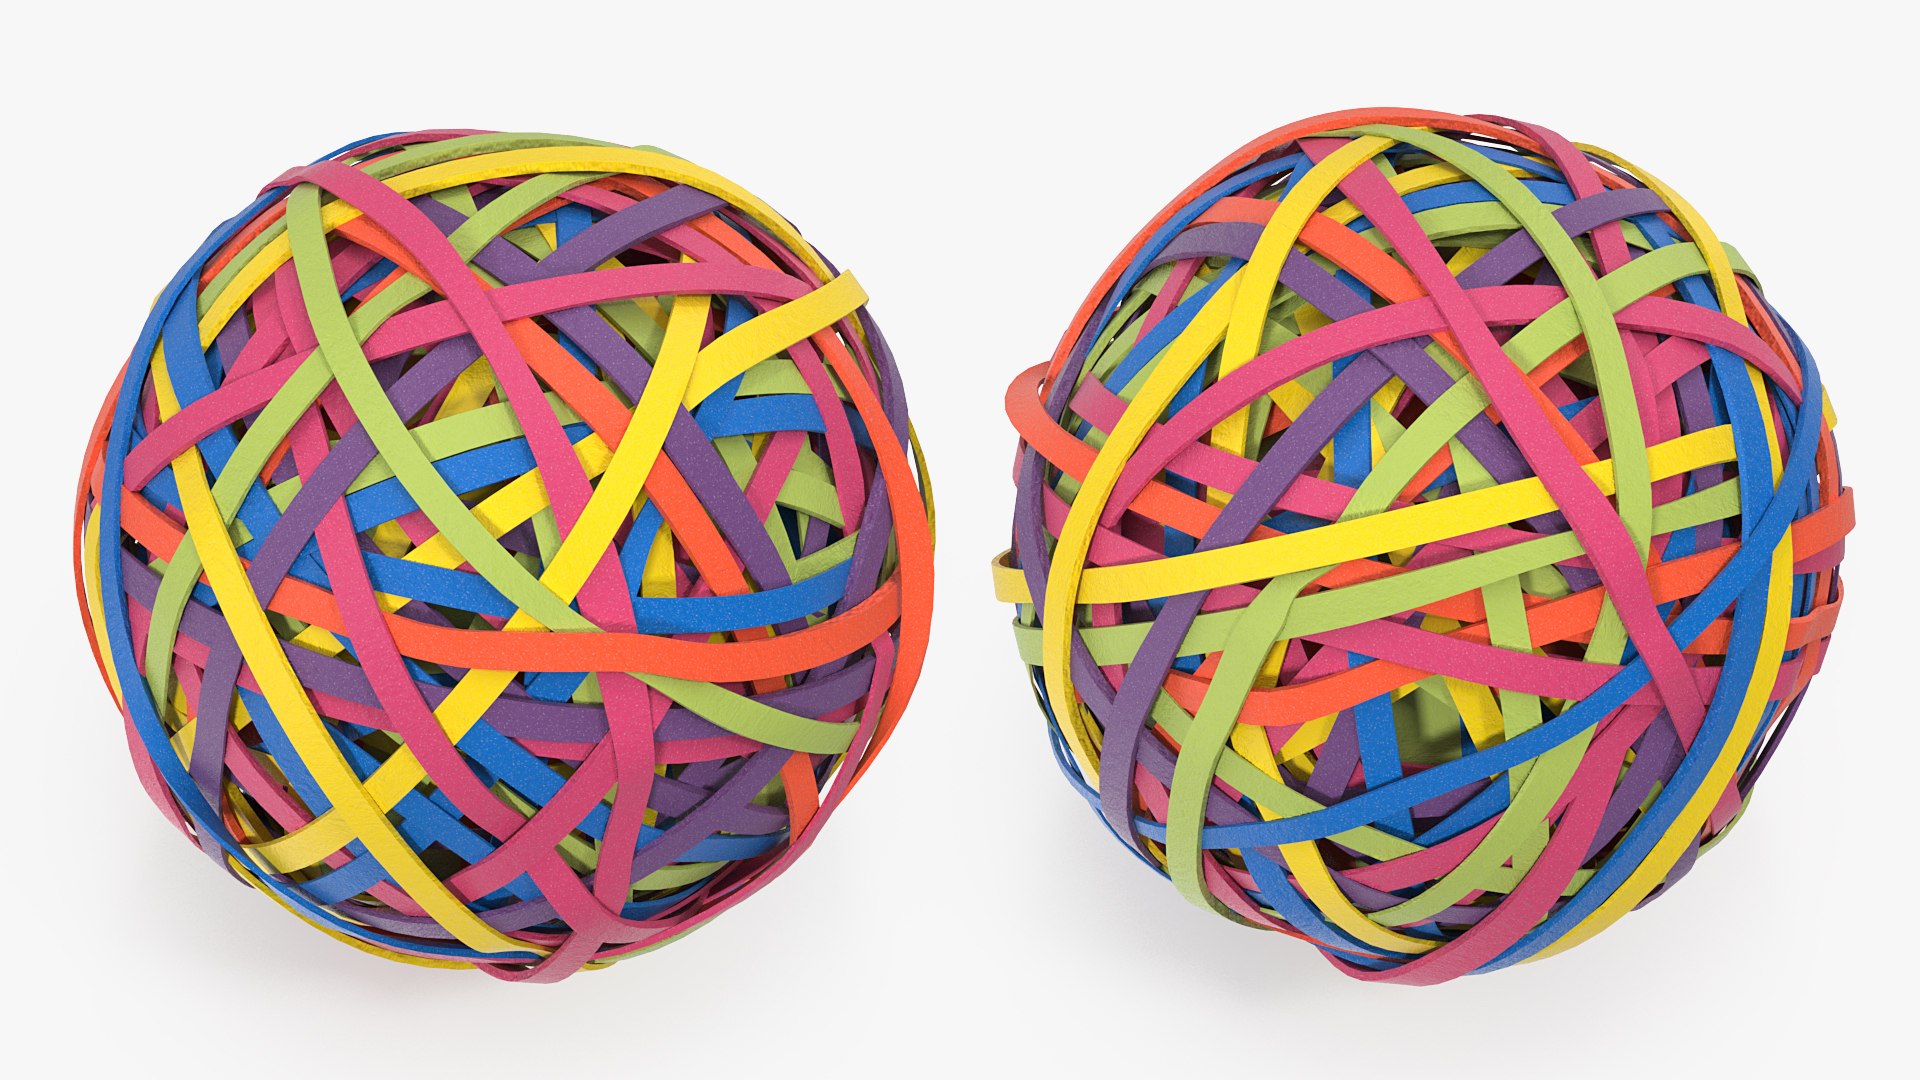 68,238 Rubber Band Images, Stock Photos, 3D objects, & Vectors